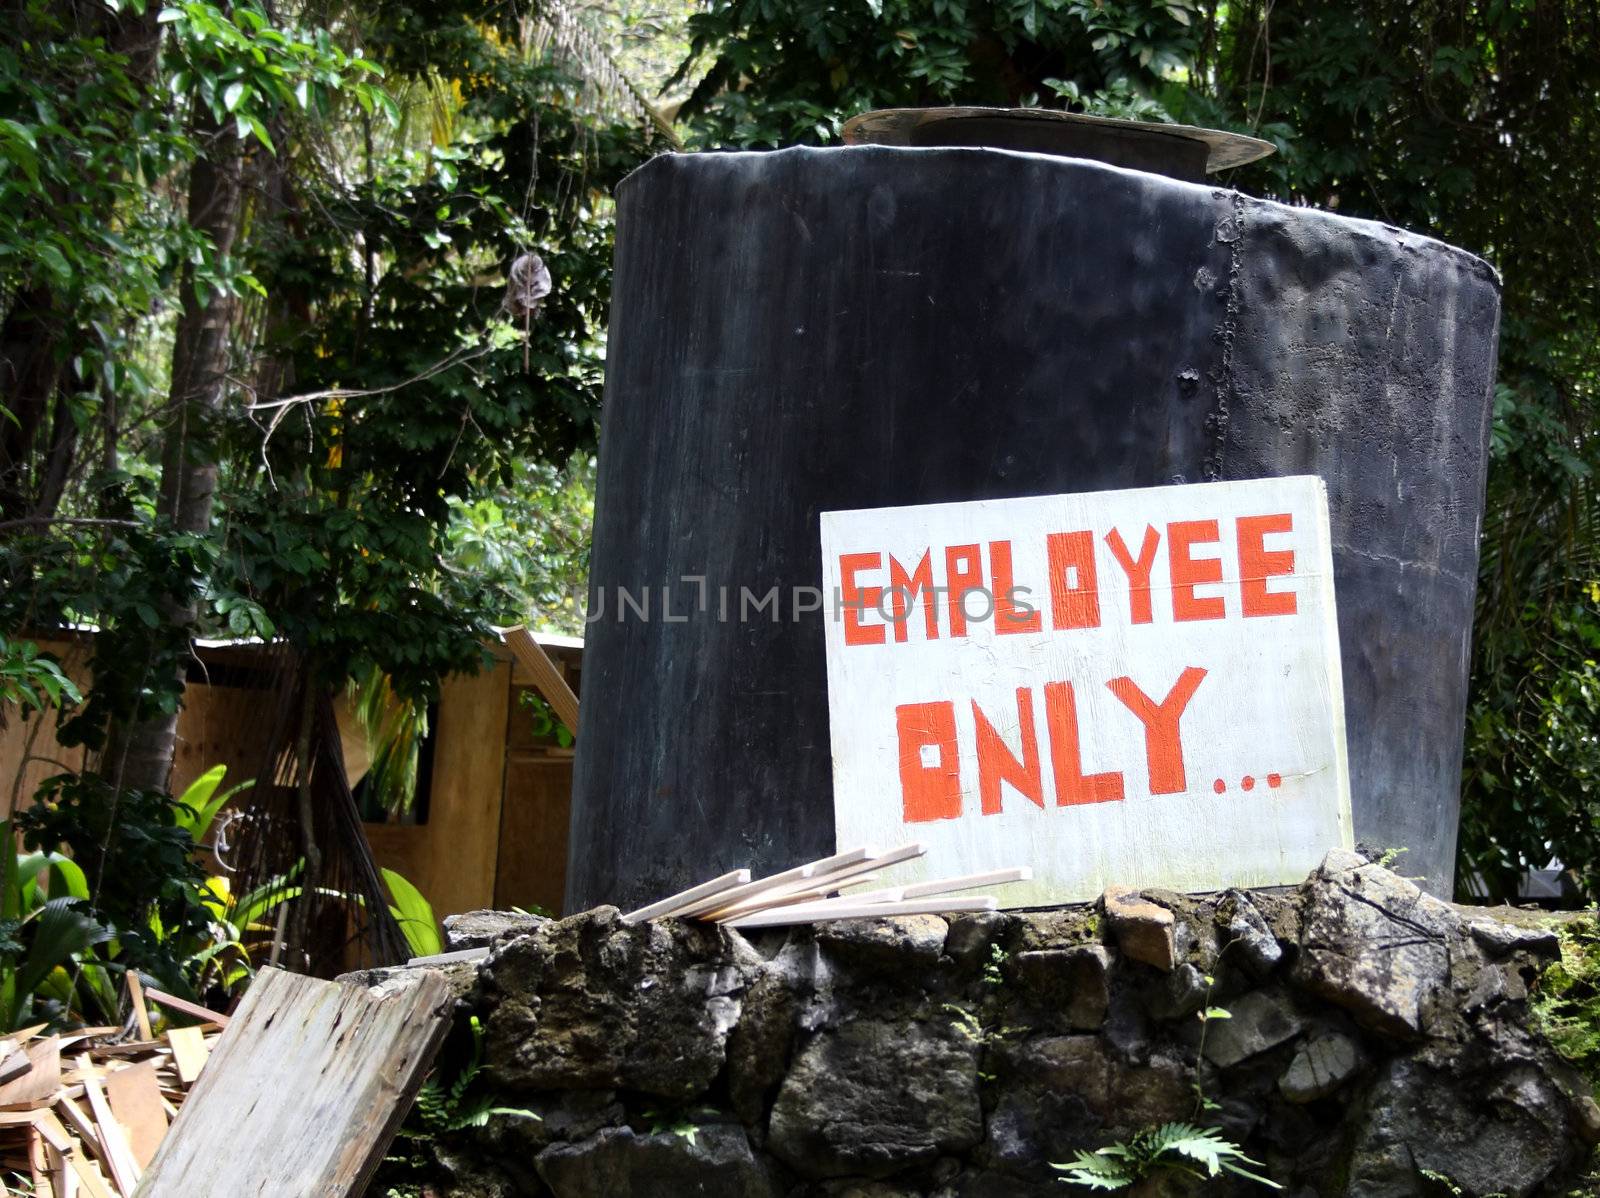 A homemade employee only sign at a  old distillery. 